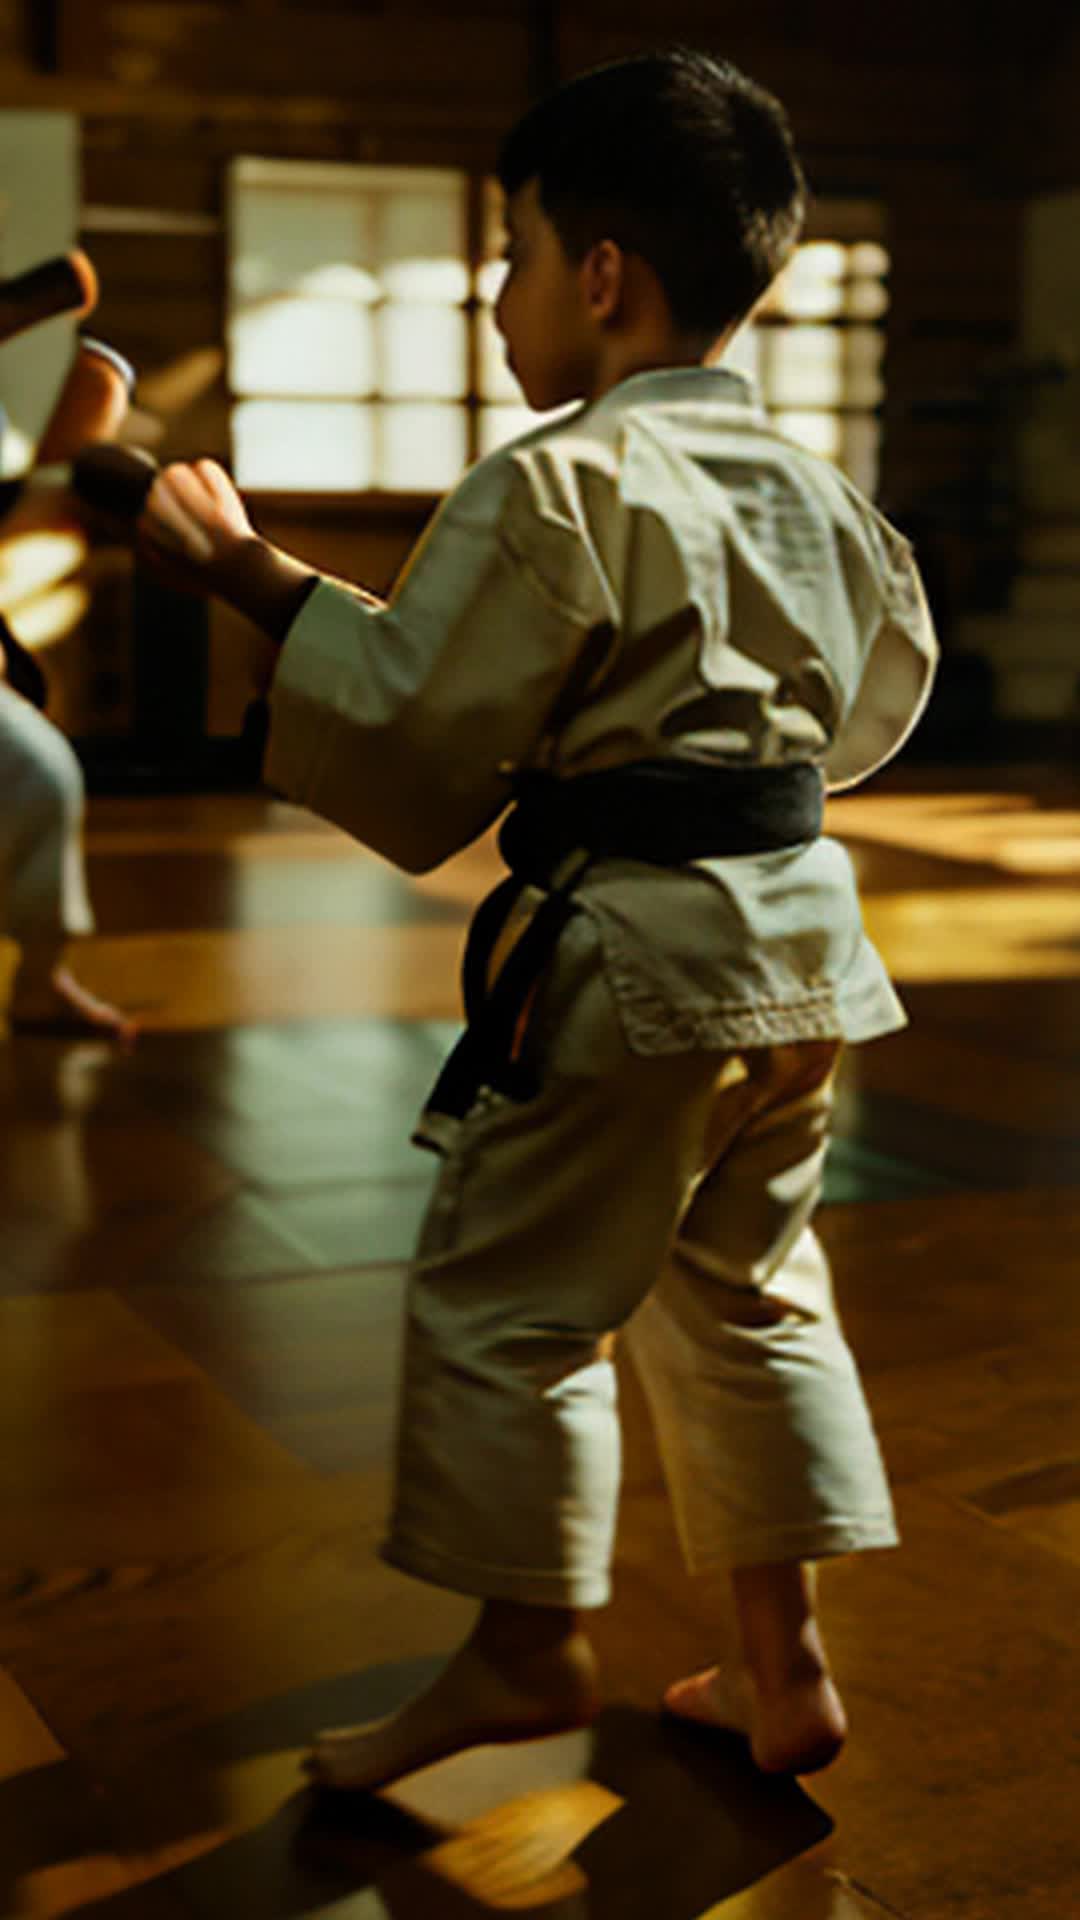 Boy following mysterious stranger, entering world of karate training, intense atmosphere, dojo interior, wooden floors, traditional gis, high detailed, sharp focus, soft shadows, every step echoes